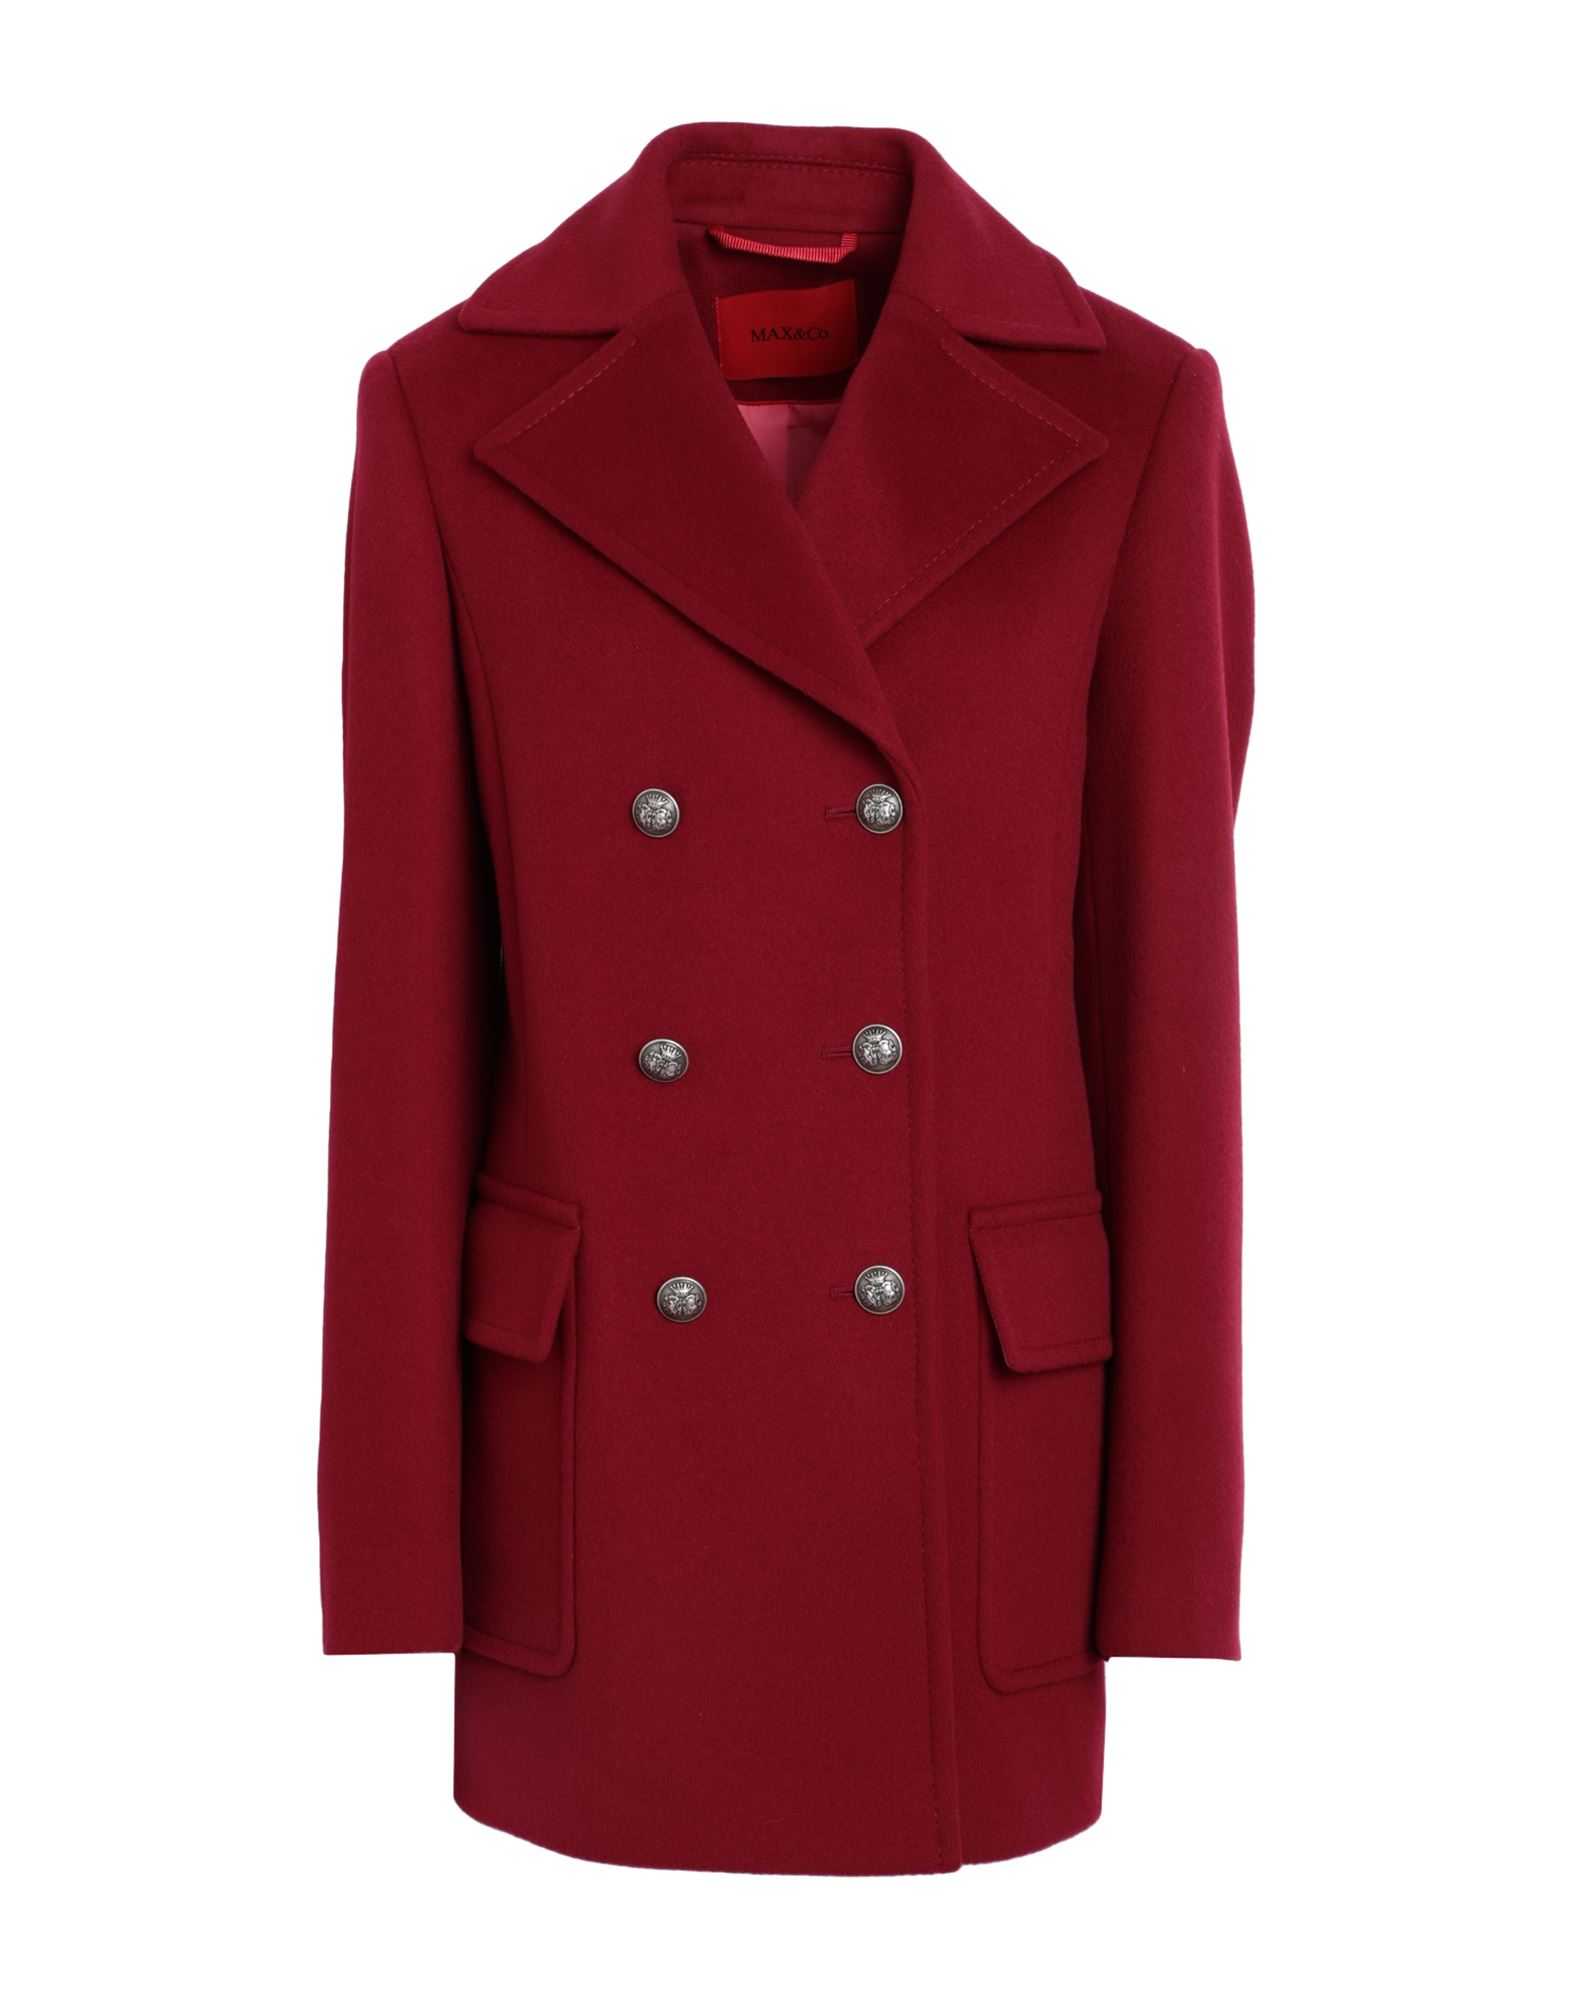 Max & Co . Woman Coat Burgundy Size 0 Virgin Wool In Red